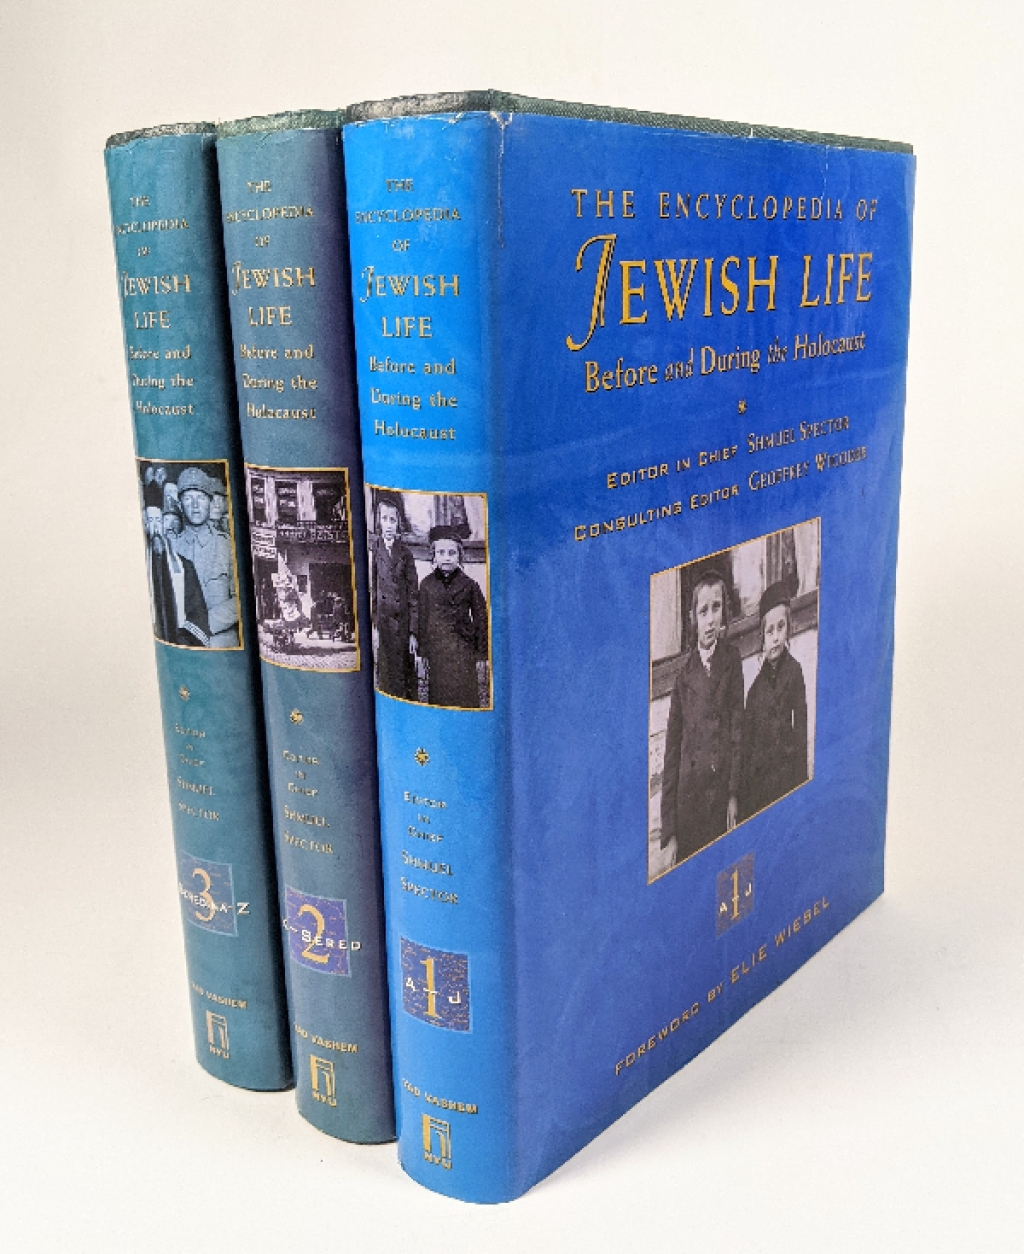 The Encyclopedia of Jewish Life Before and During Holocaust, vol. I-III